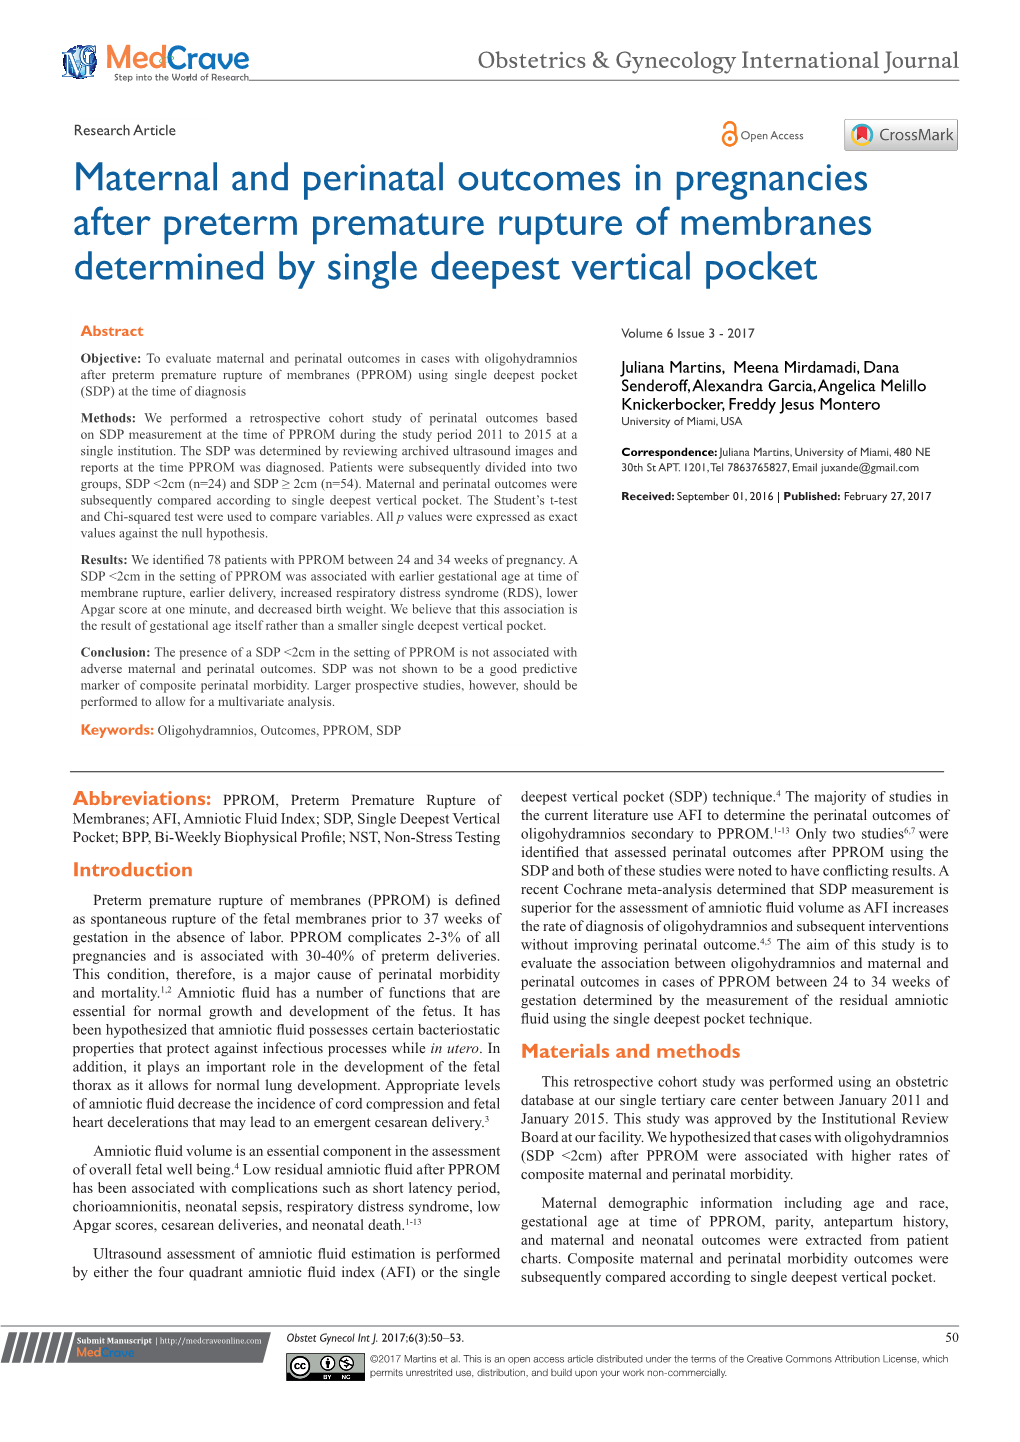 Maternal and Perinatal Outcomes in Pregnancies After Preterm Premature Rupture of Membranes Determined by Single Deepest Vertical Pocket